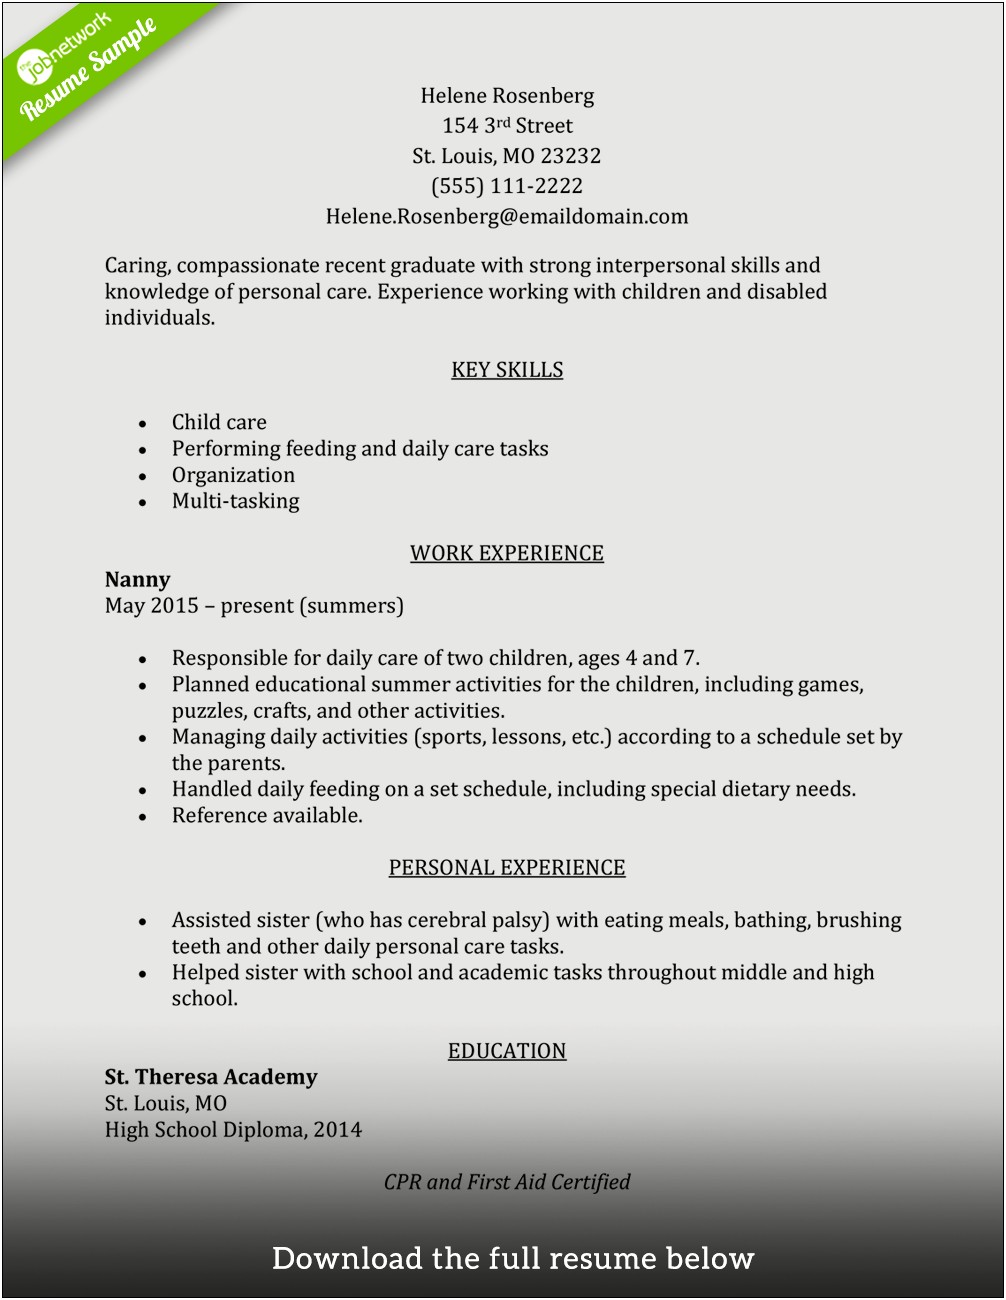 Examples Of Resume Skills For Child Care